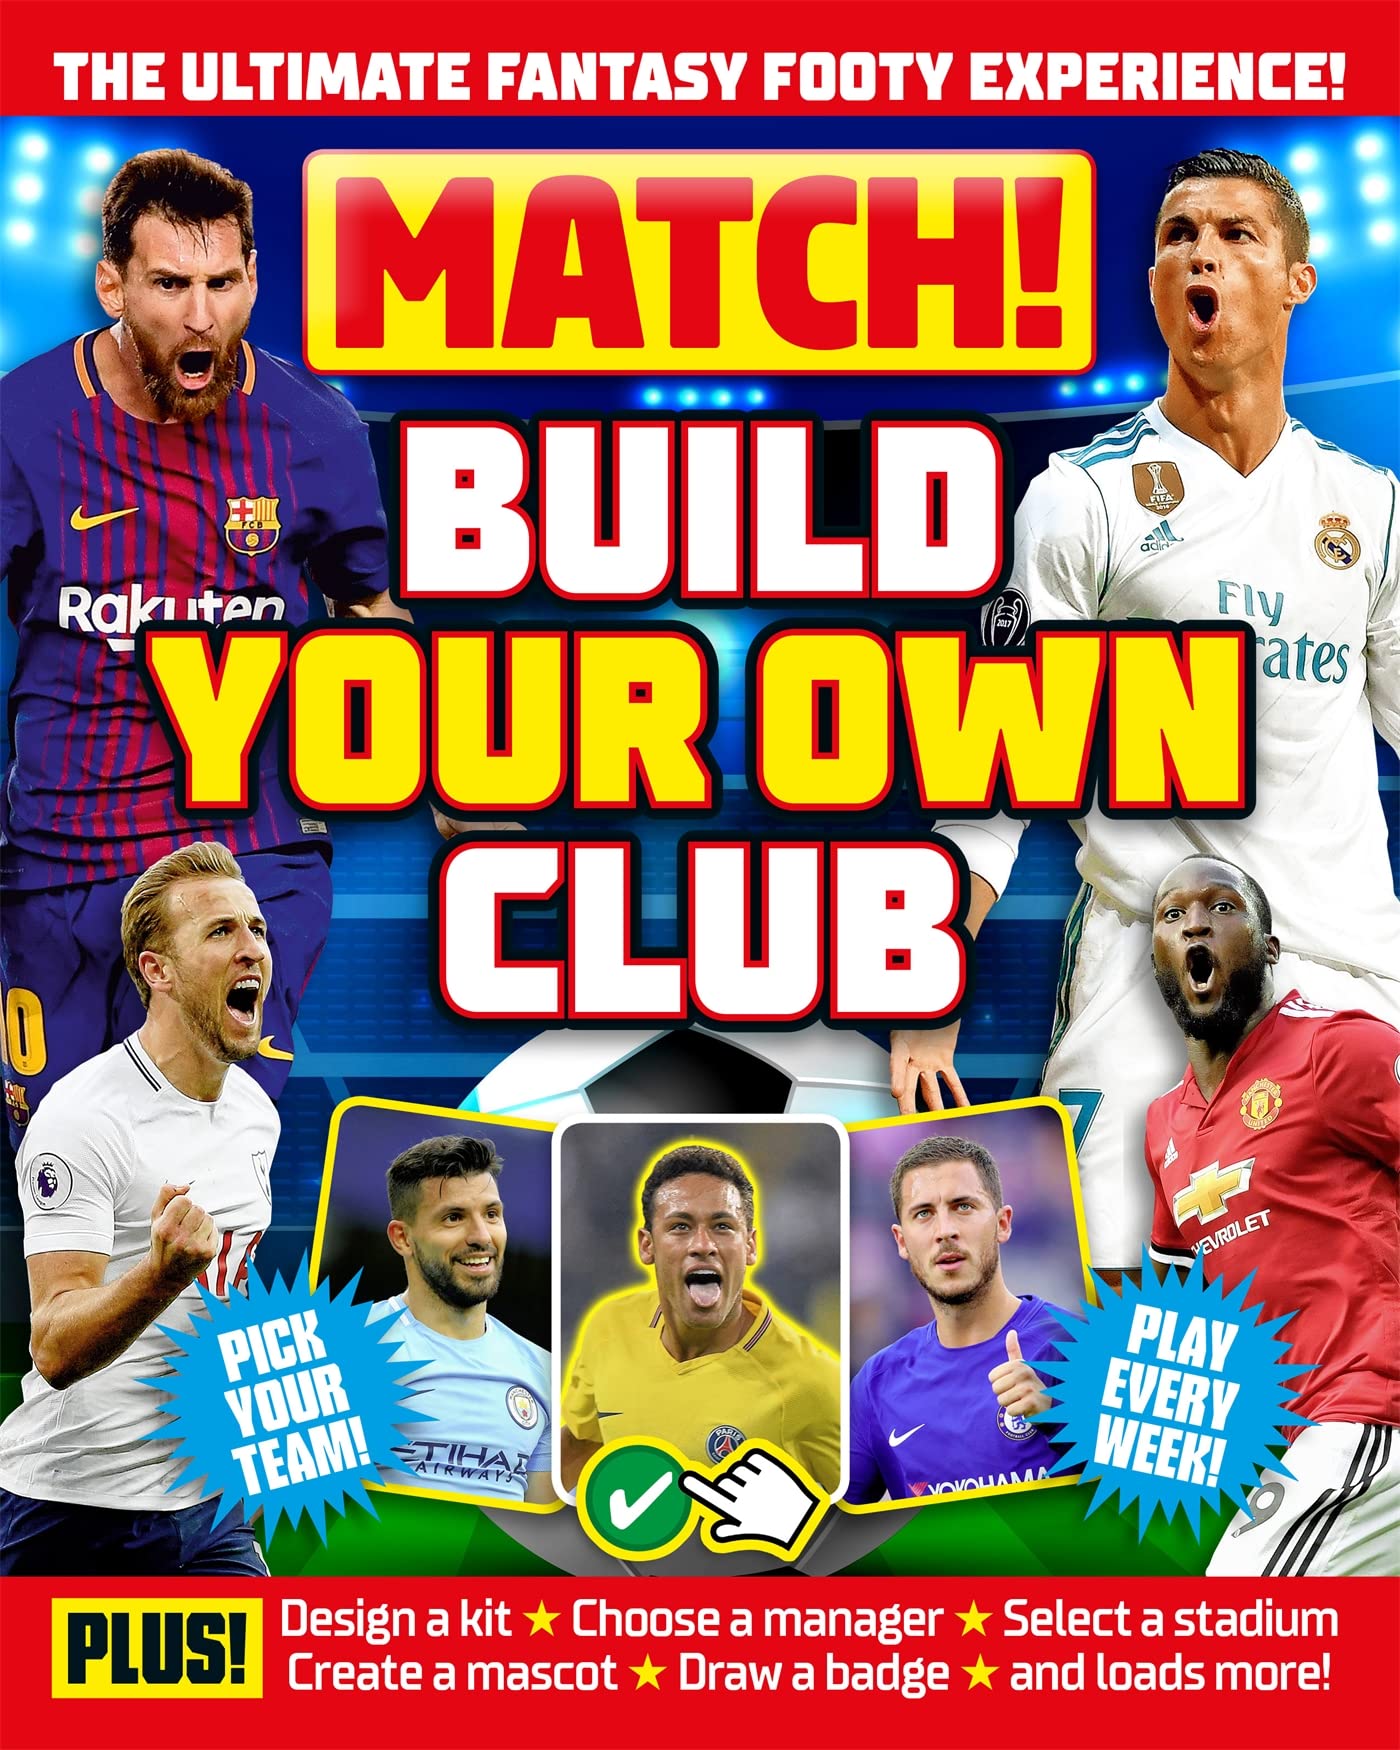 Match! Build Your Own Club! The Ultimate Fantasy Footy Experience! Football Book